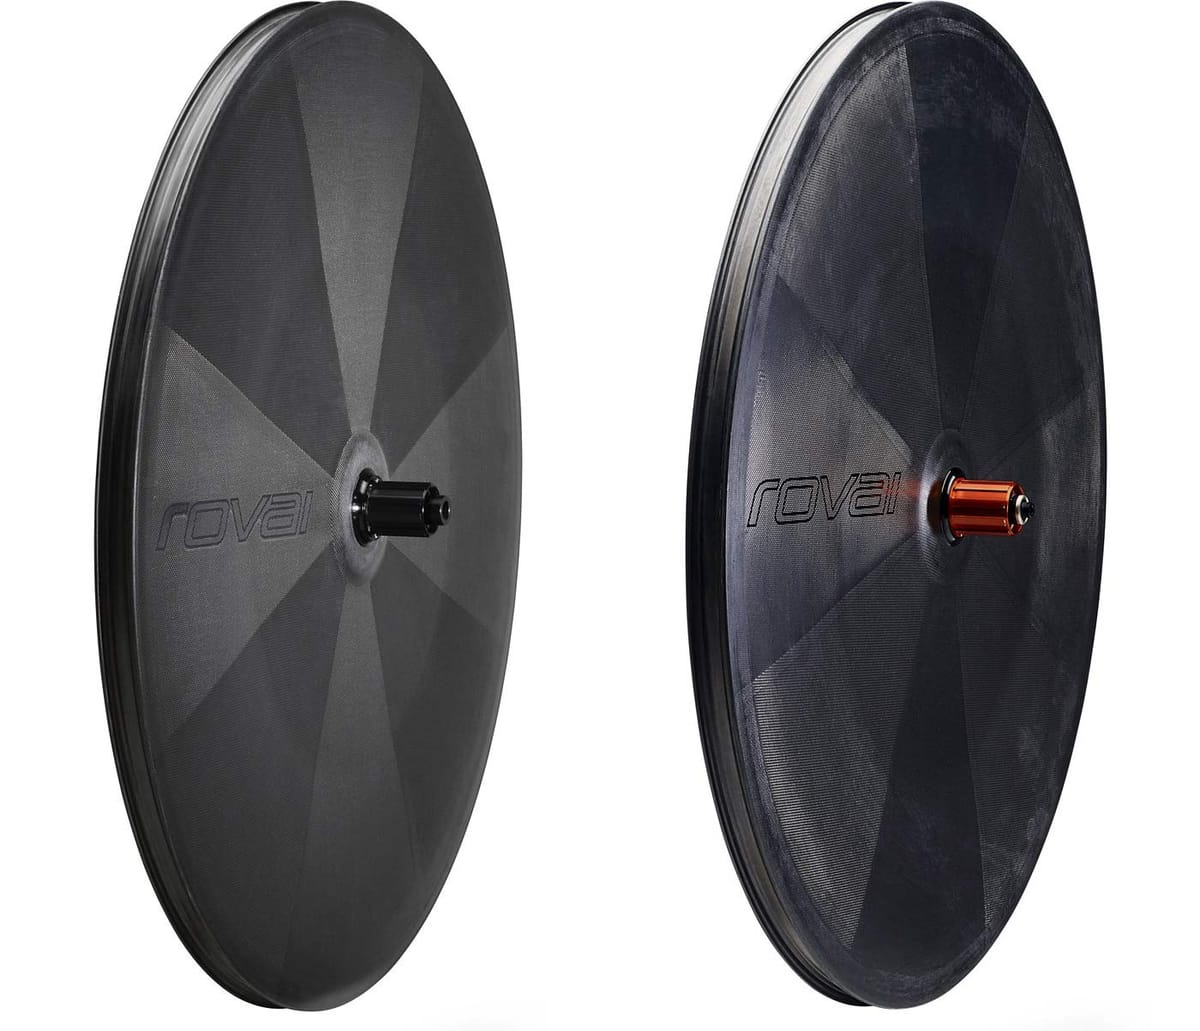 Roval's New 321 Wheel is the Lightest Disc Wheel on the Market